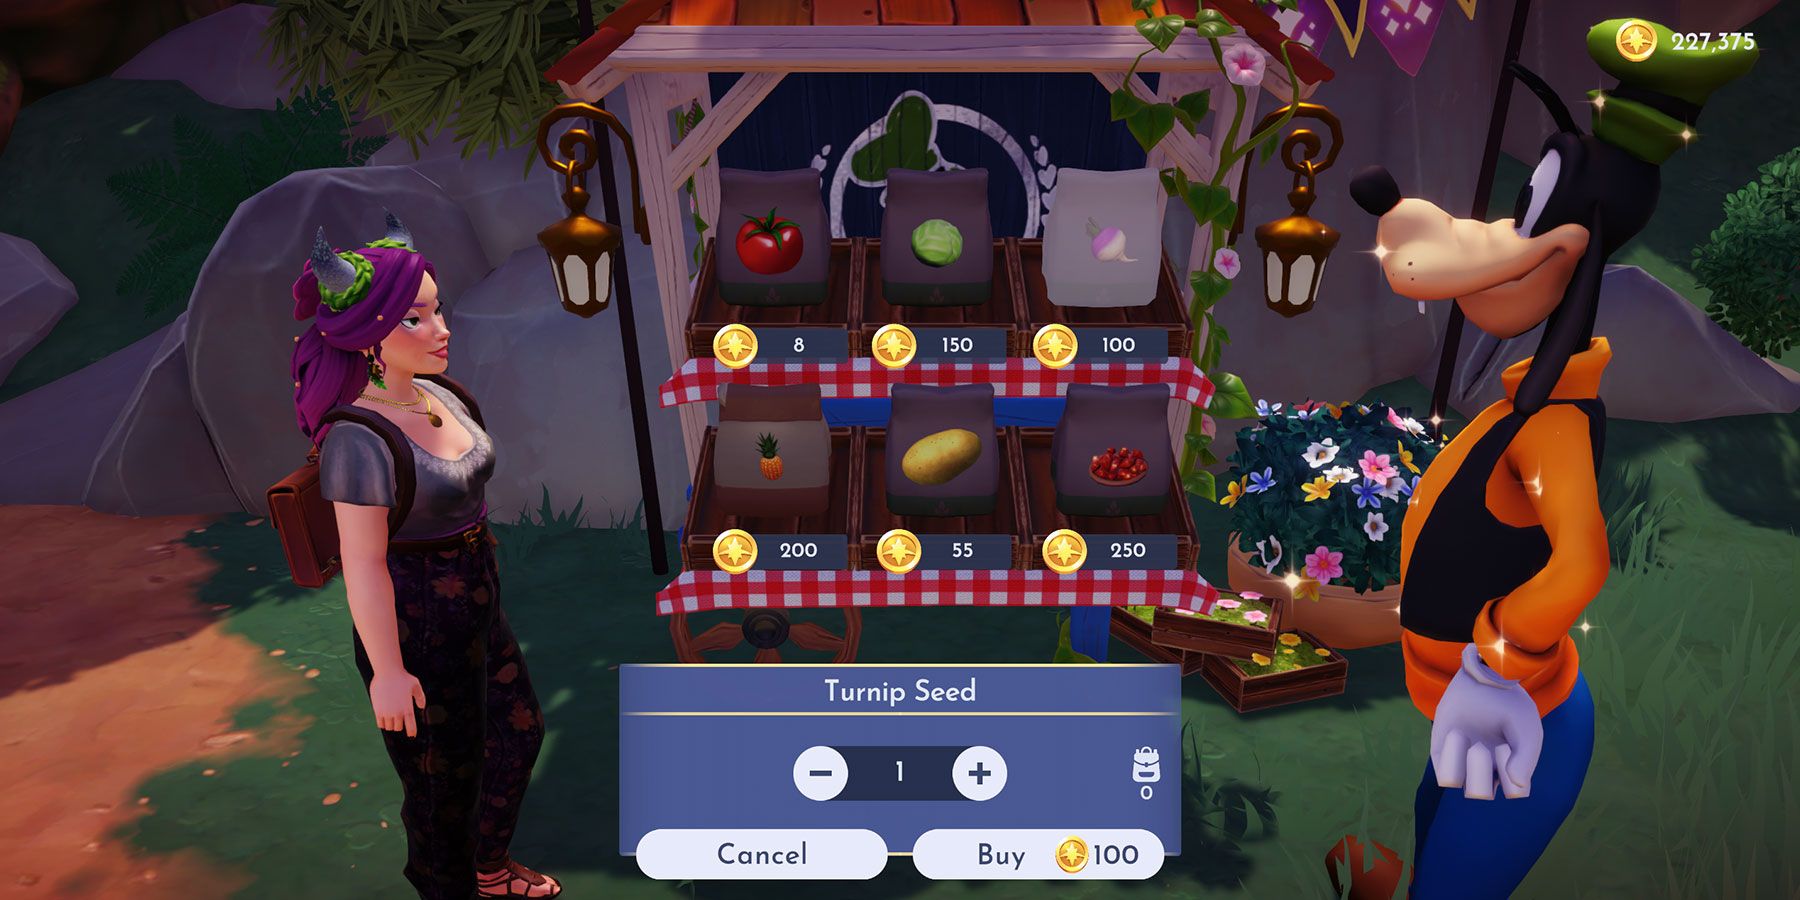 Buying Turnip Seeds from Goofy's Stall in Wild Tangle in Disney Dreamlight Valley